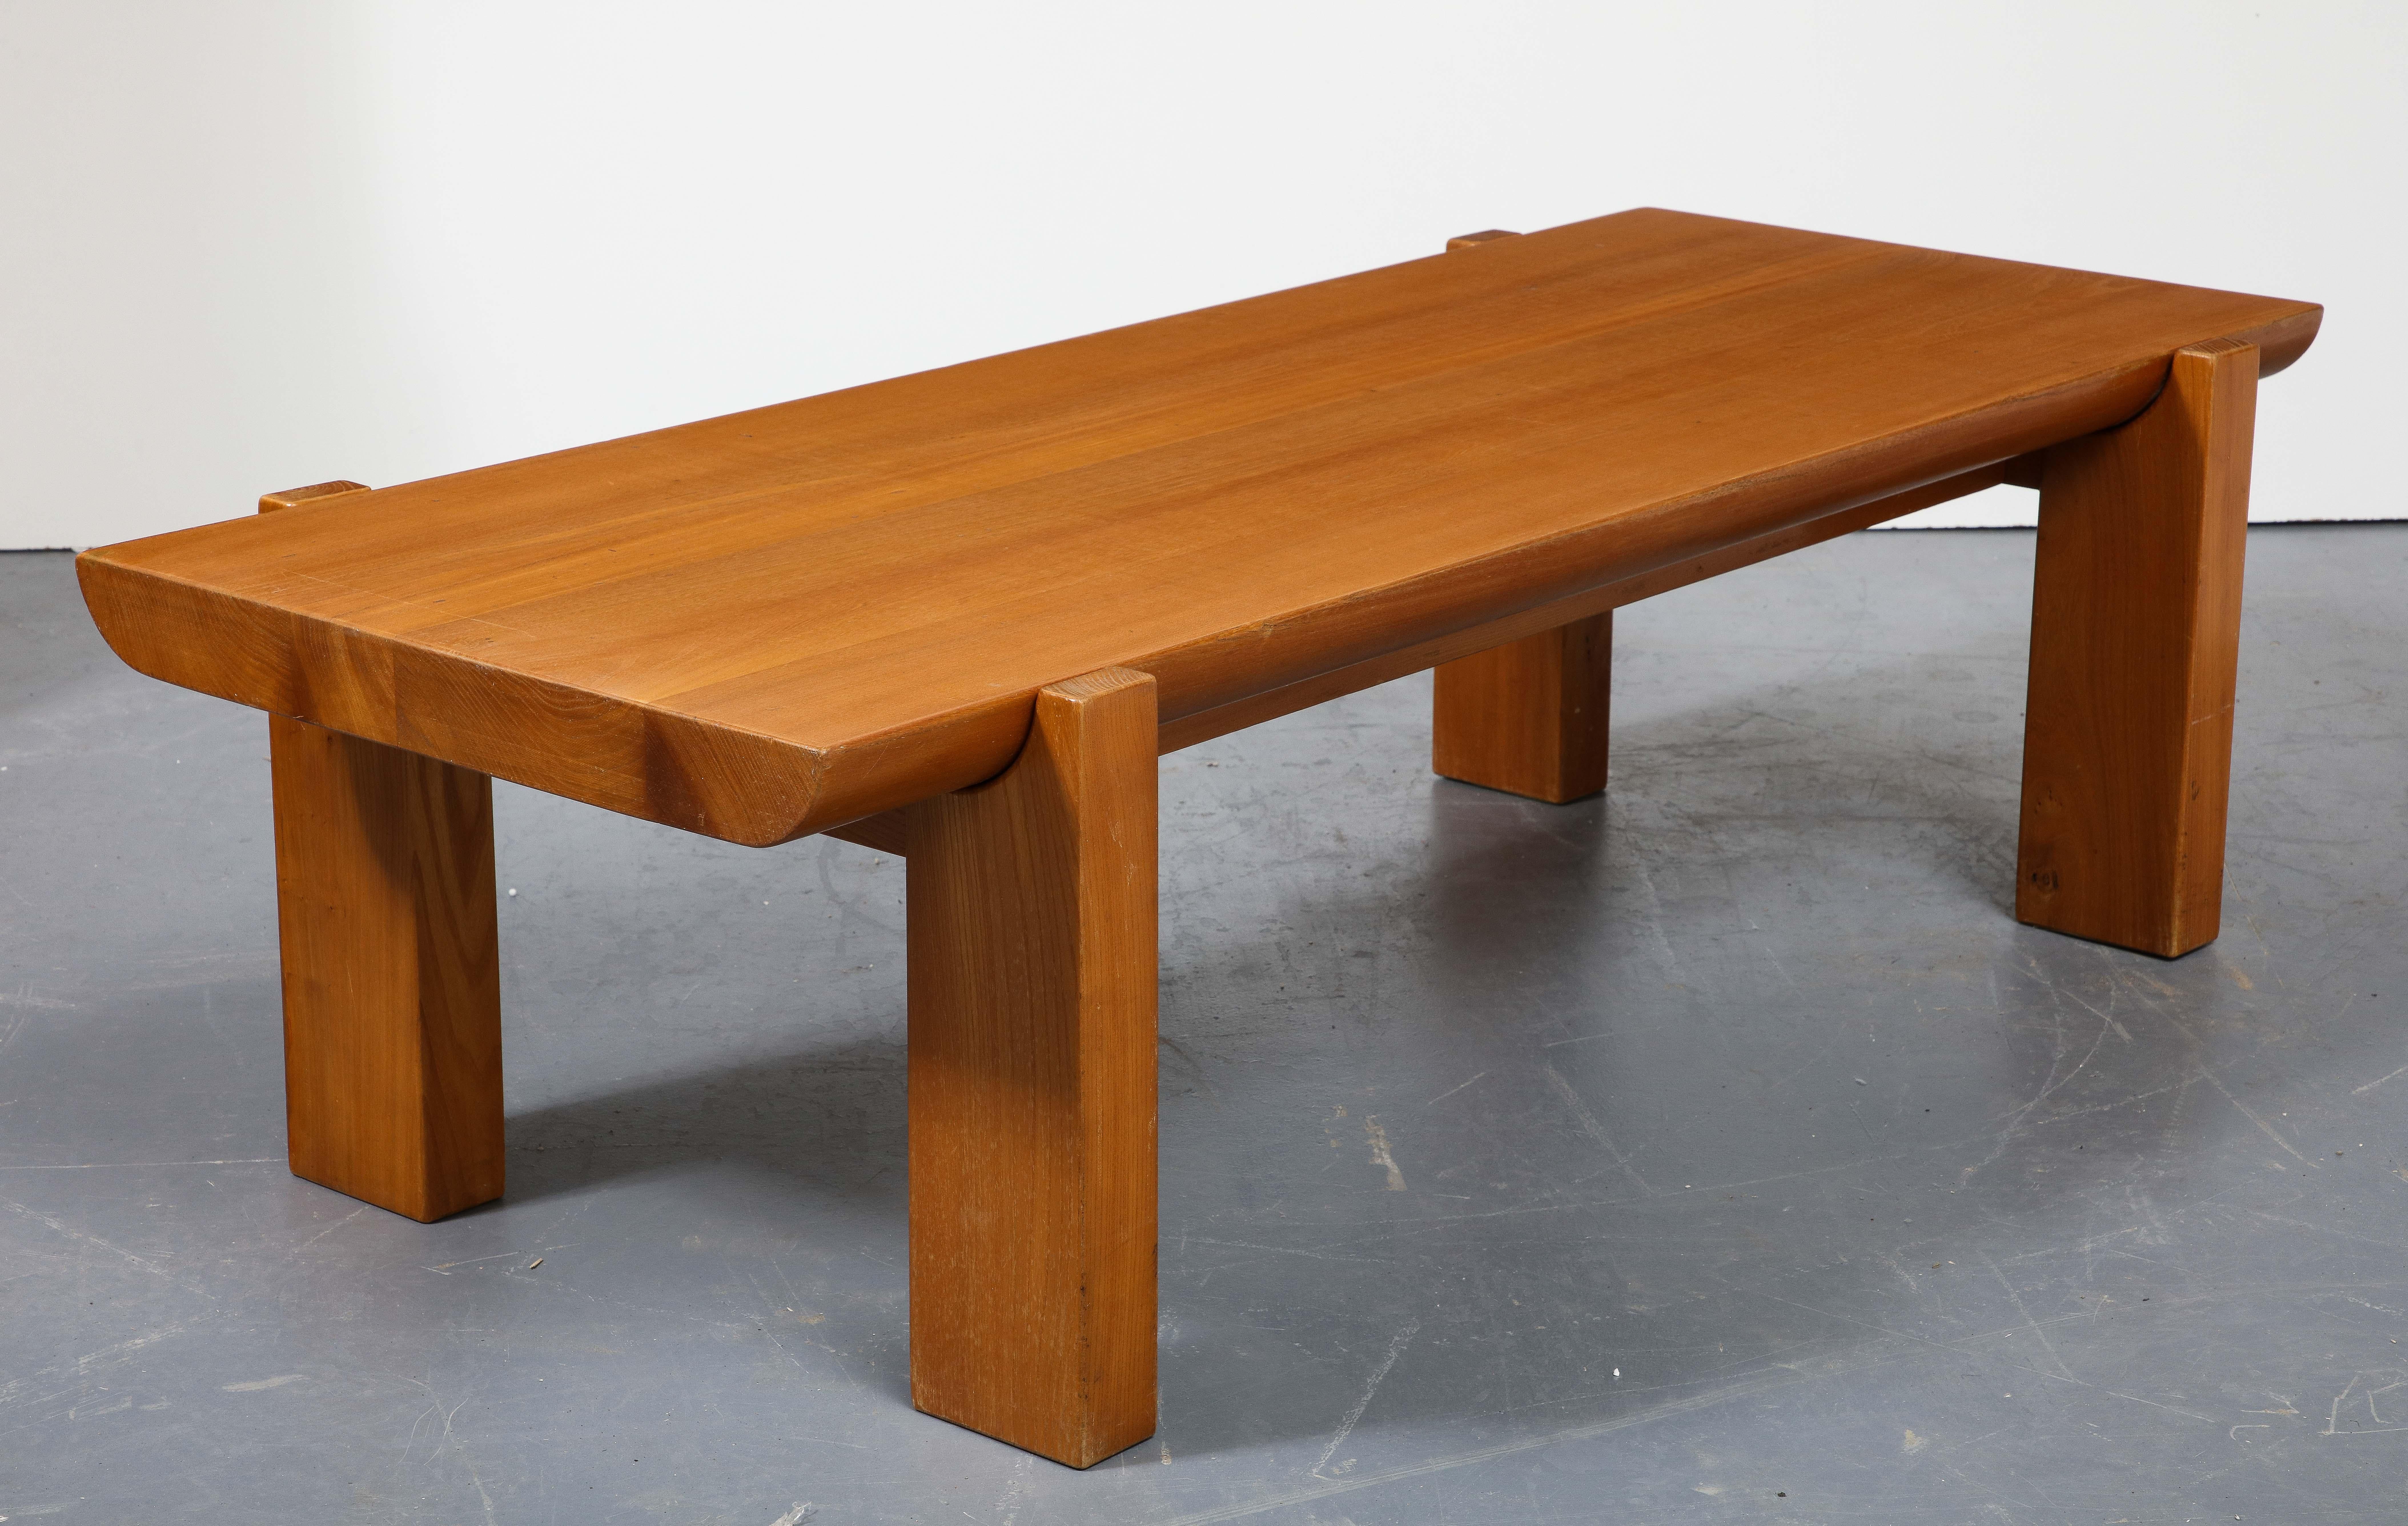 Elmwood coffee table by Luigi Gorgone, Italy, c. 1970s

This simple yet sleek coffee table consists of plank legs and a handsome elmwood top whose rounded shape fits seamlessly with the curvilinear frame.